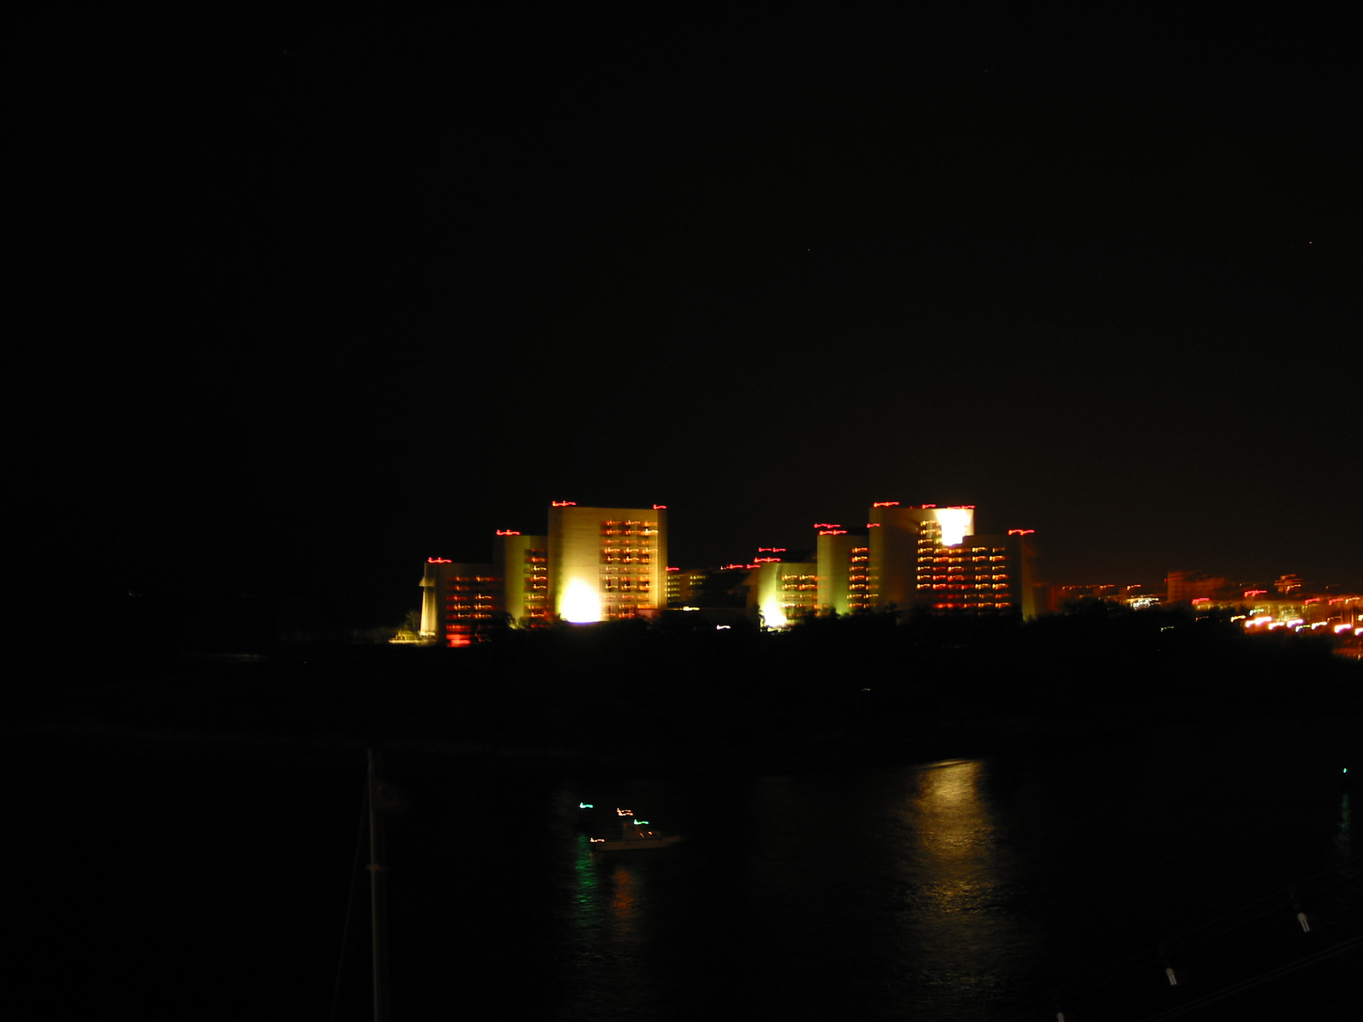 A nightime view of Puerto Viarta. We need more pics of Puerto Viarta, send us your pics! :)